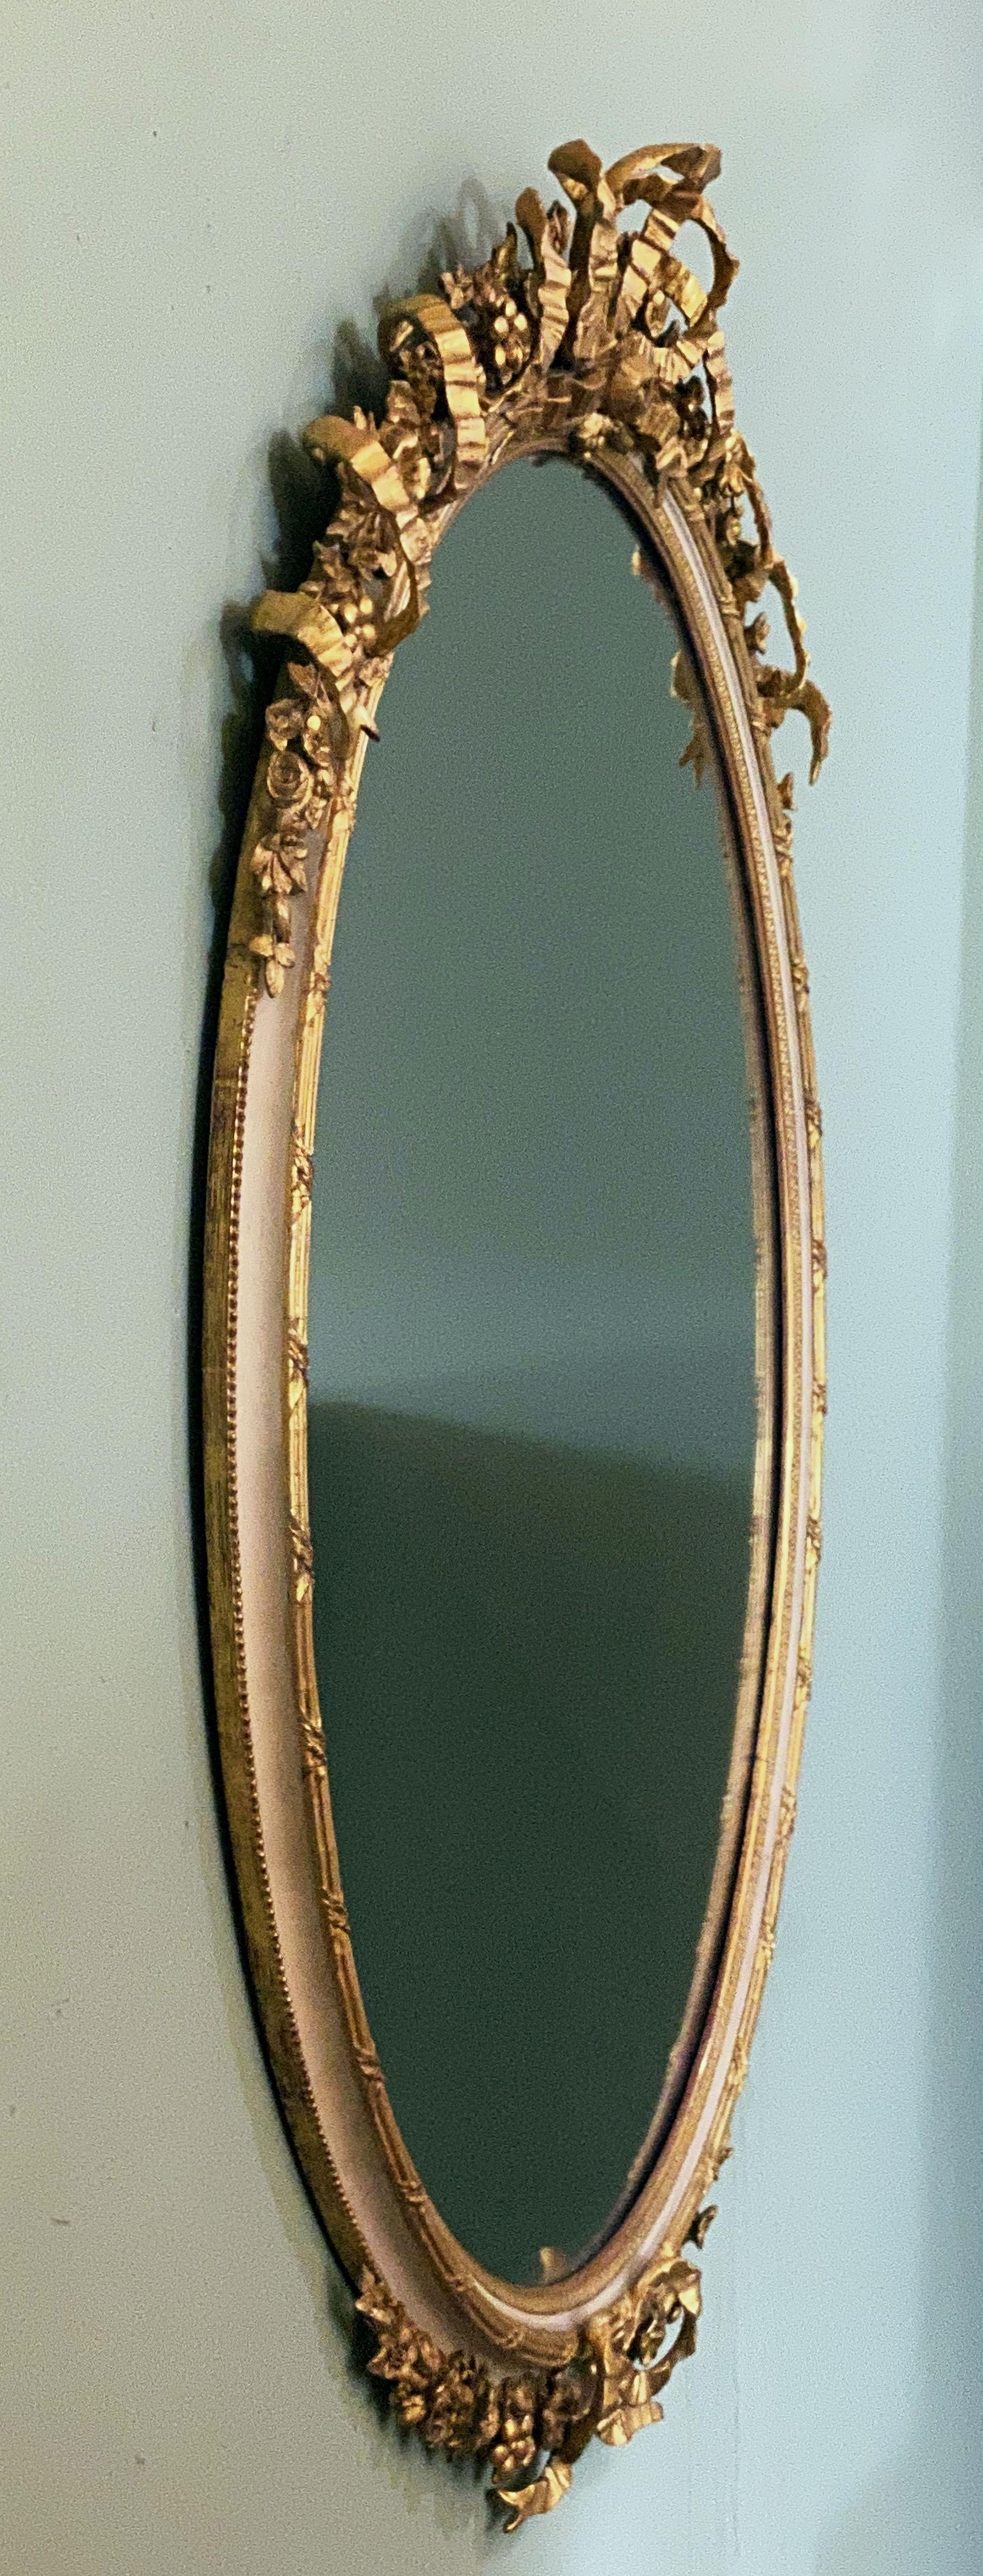 A fine French gilt and parcel cream painted oval wall or hall mirror with ribbon tied floral crest and lower frieze - in the Louis XVI manner with rococo or baroque styling.

Dimensions are: Height 57 inches x Width 42 1/2 inches x Depth 5 inches